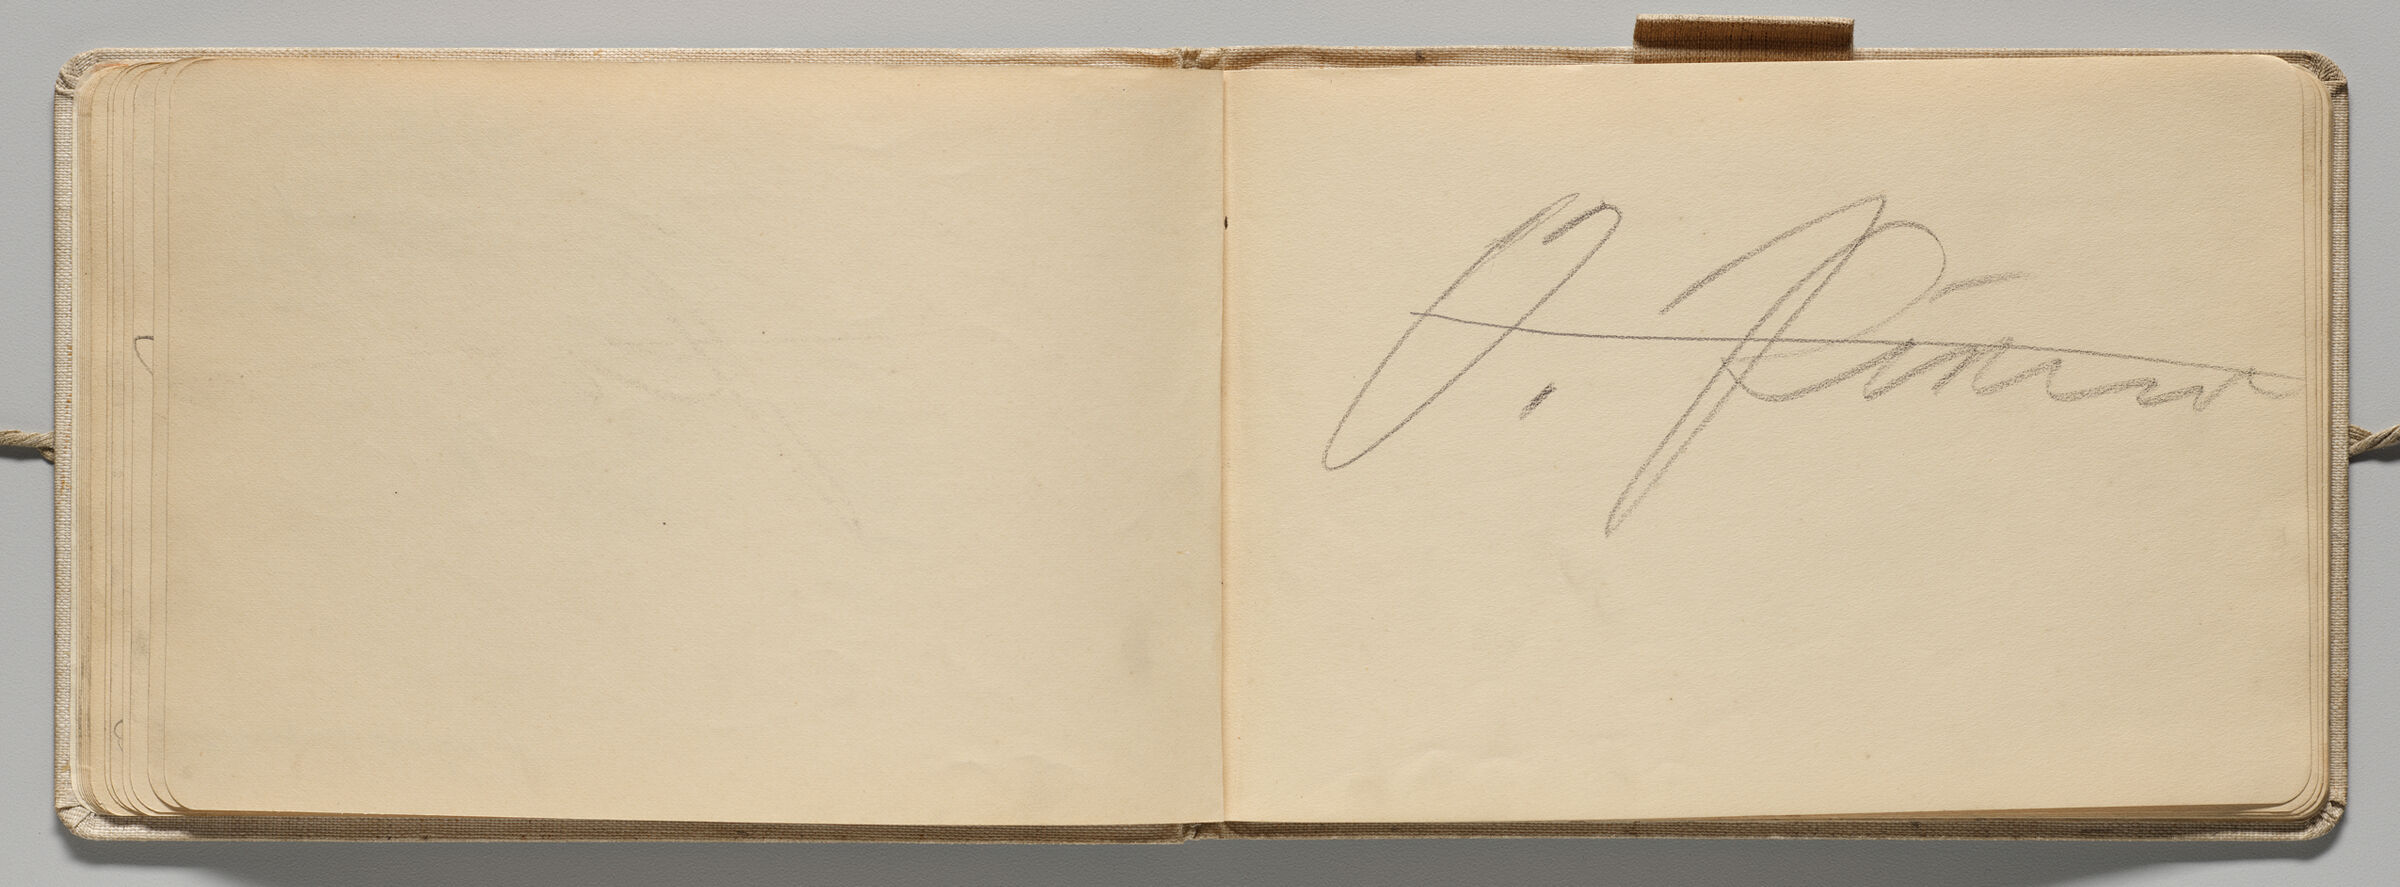 Untitled (Blank, Left Page); Untitled (Signature Crossed Out, Right Page)